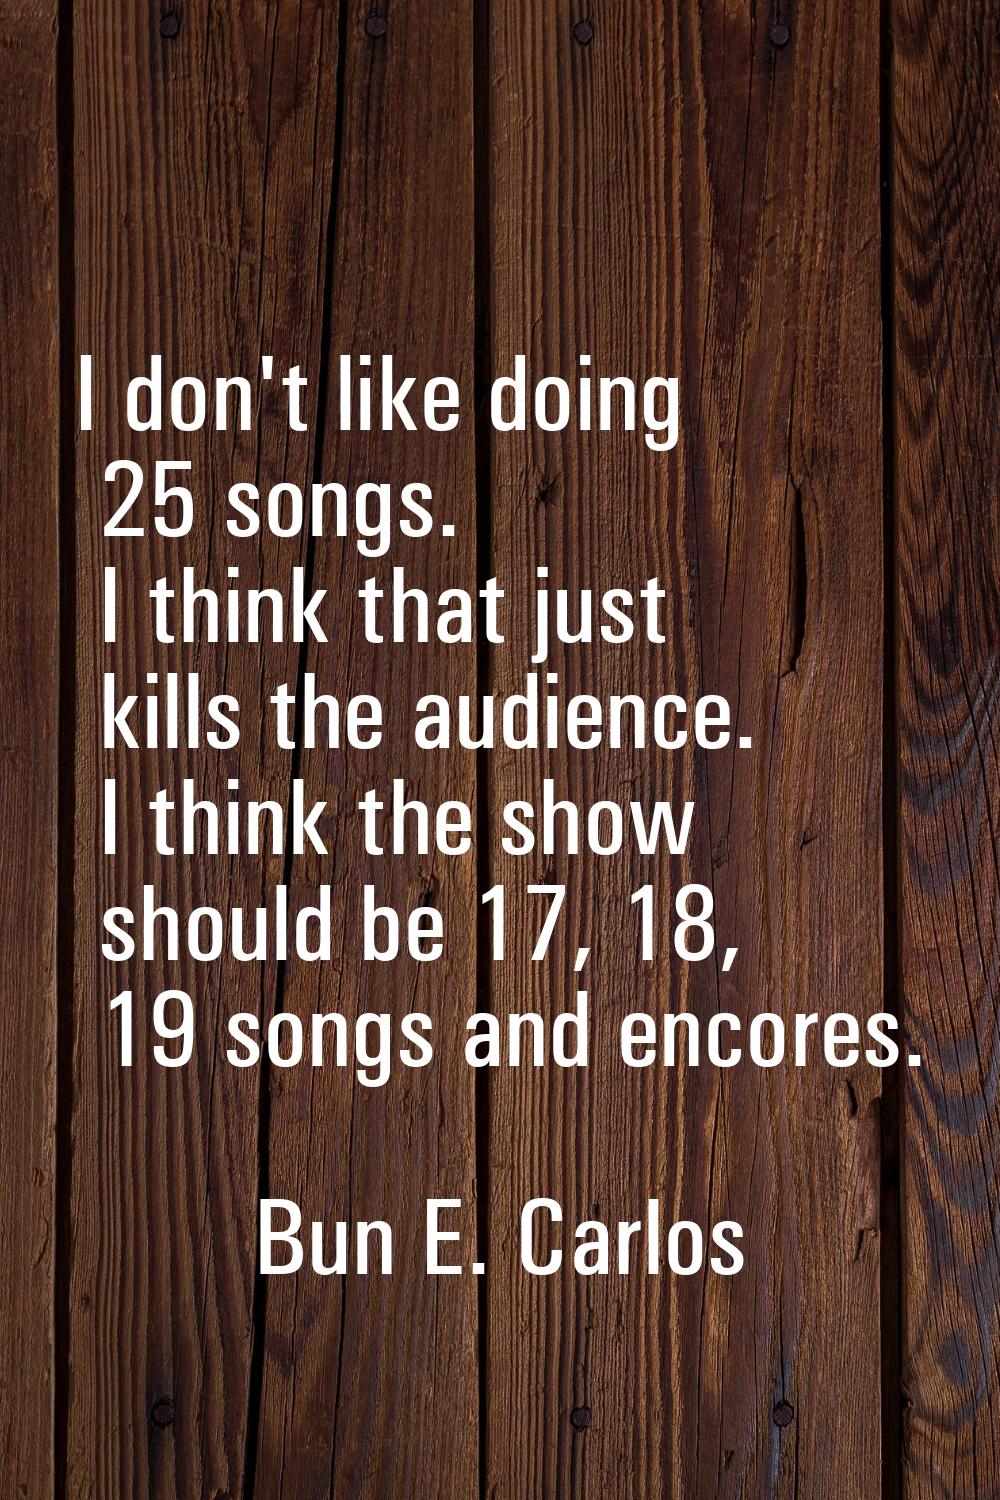 I don't like doing 25 songs. I think that just kills the audience. I think the show should be 17, 1